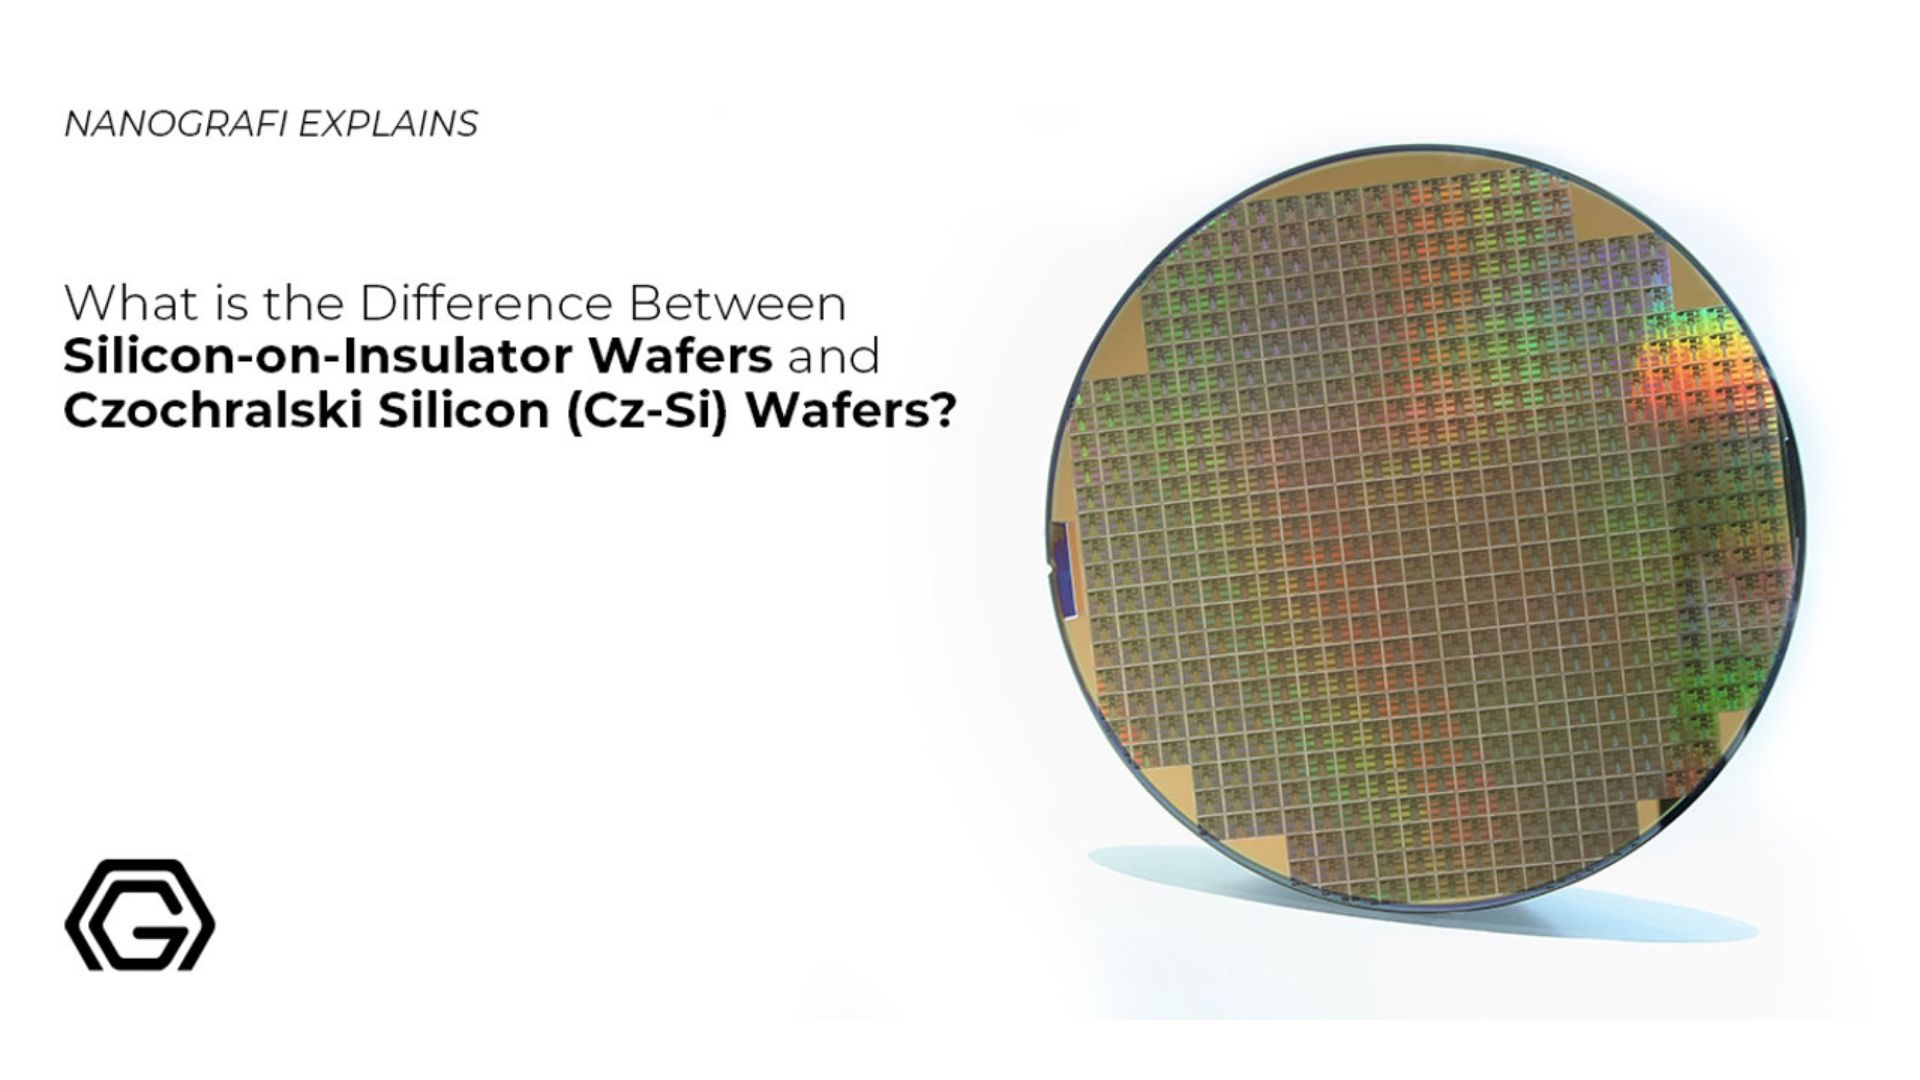 What is the difference between silicon-on-insulator wafers and Czochralski silicon (cz-si) wafers?